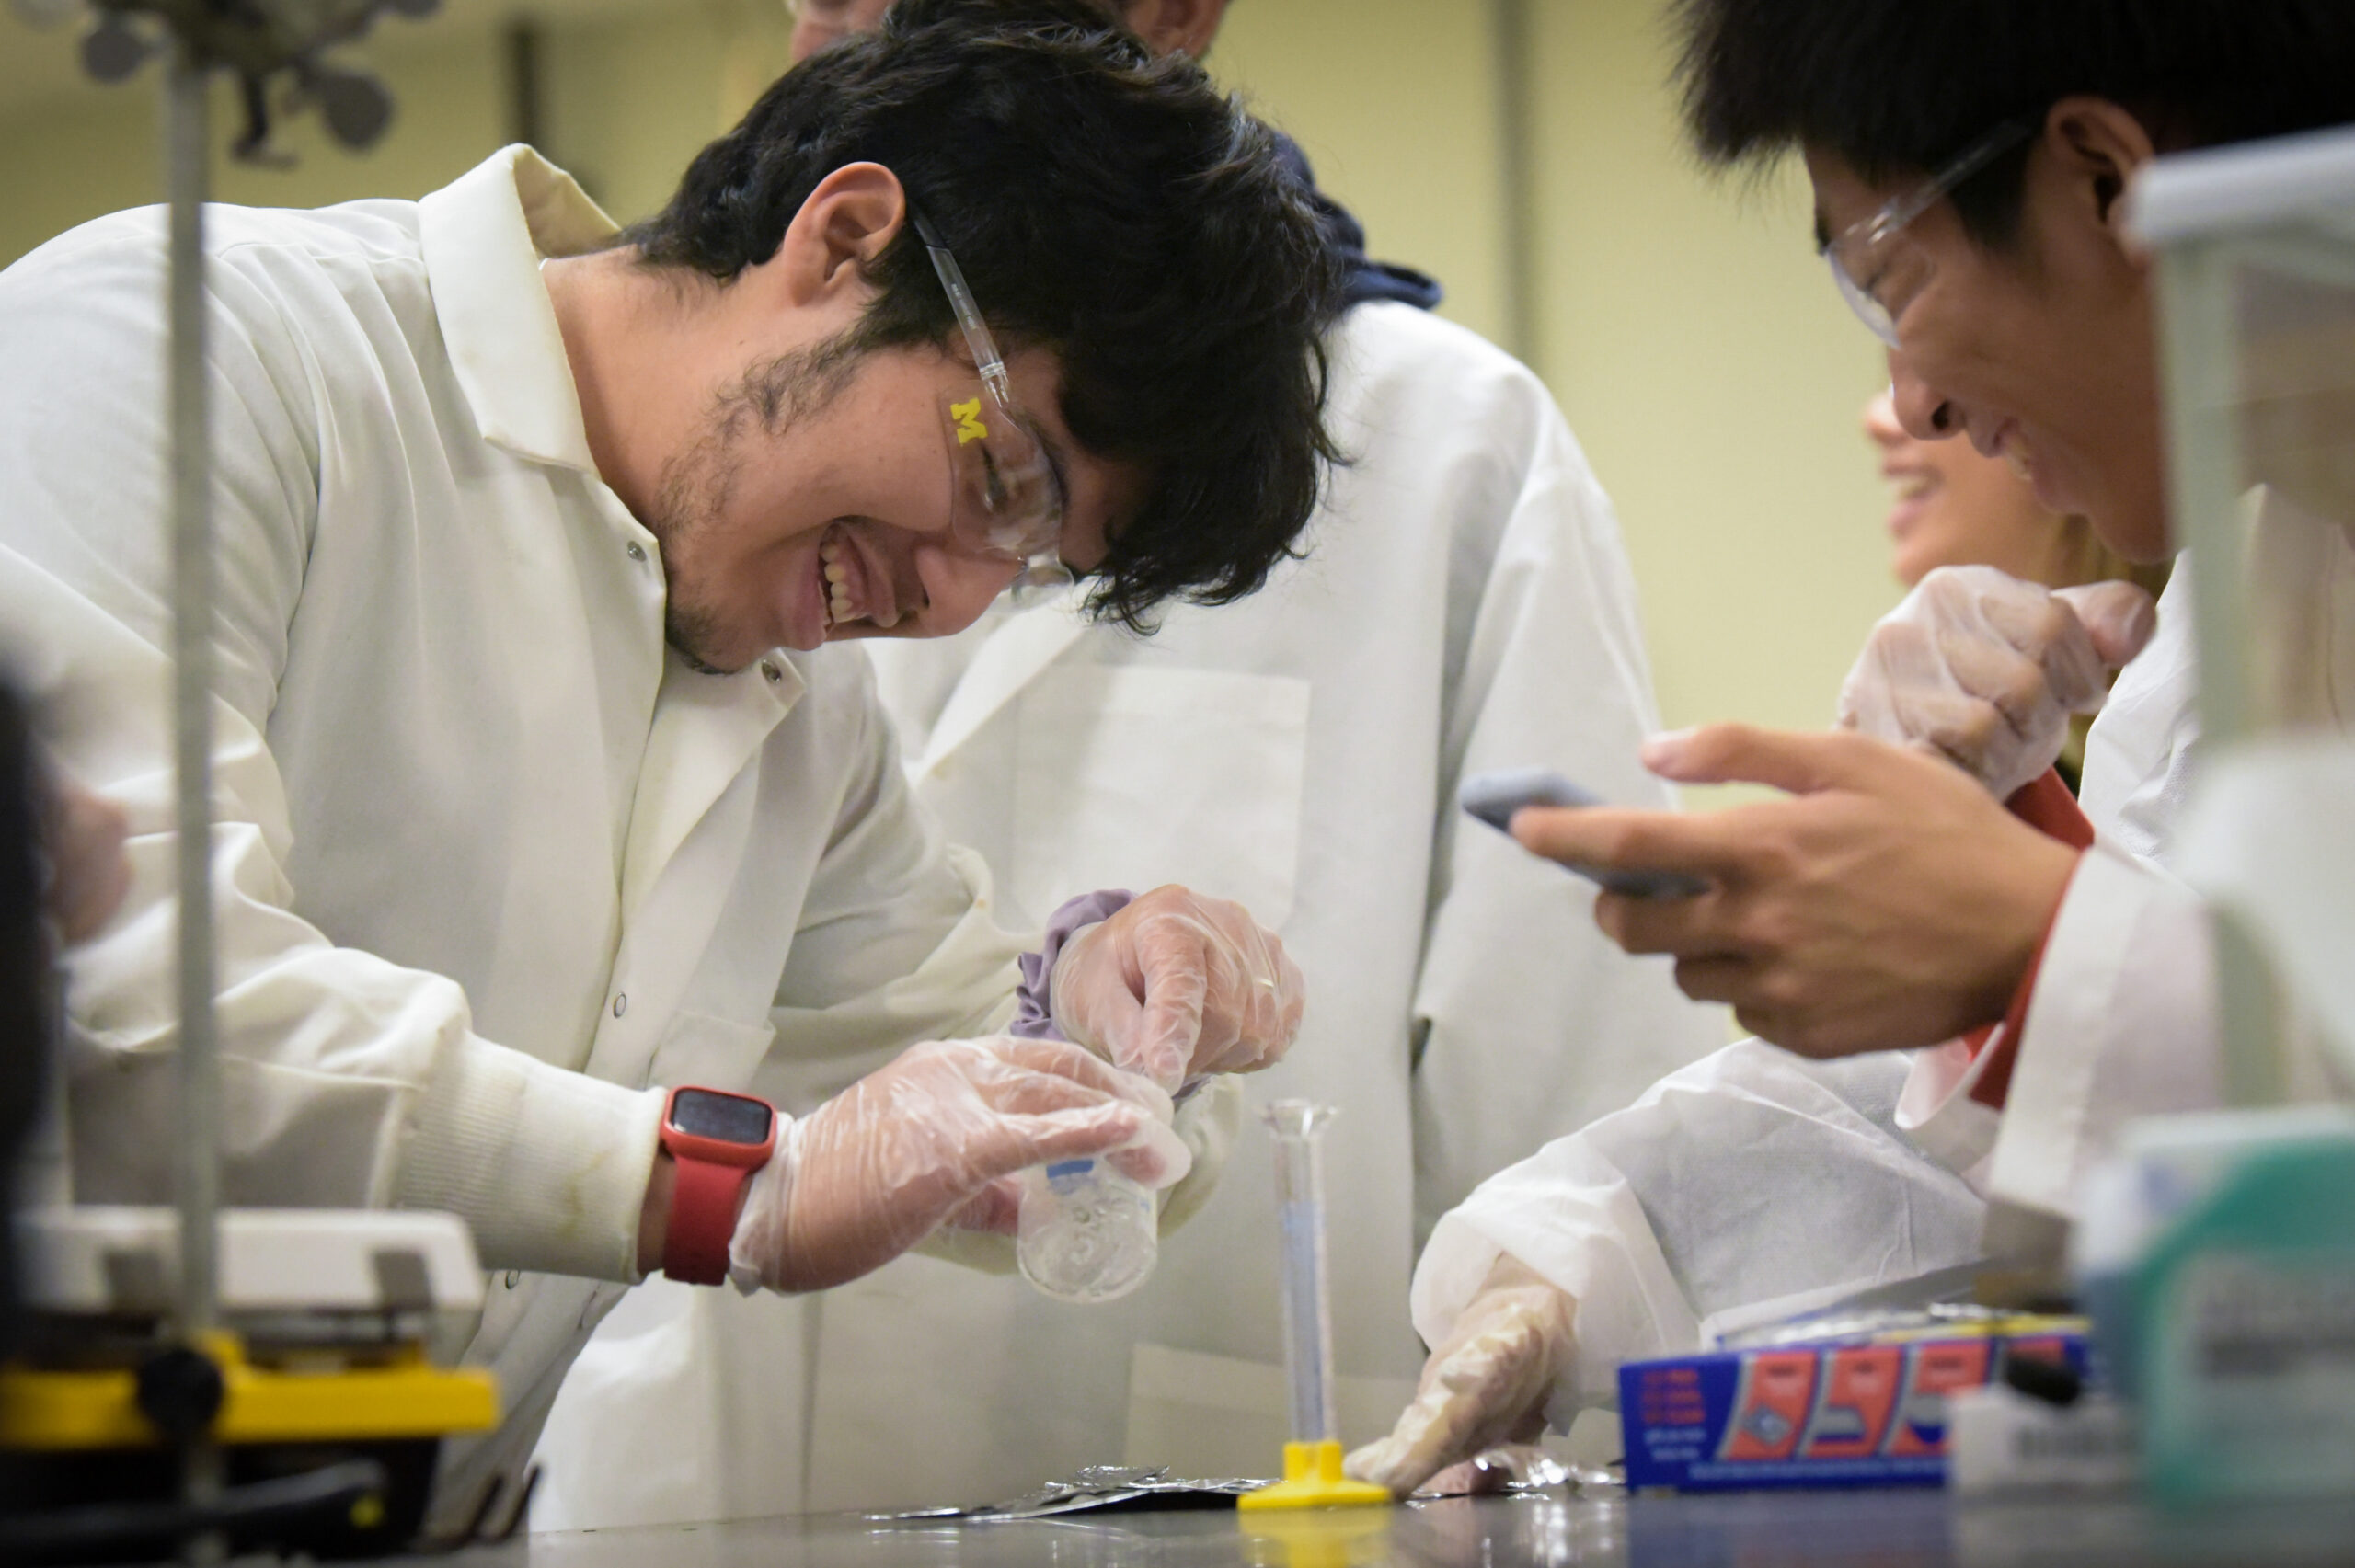 Students in lab attire smiling while looking at contents of beaker